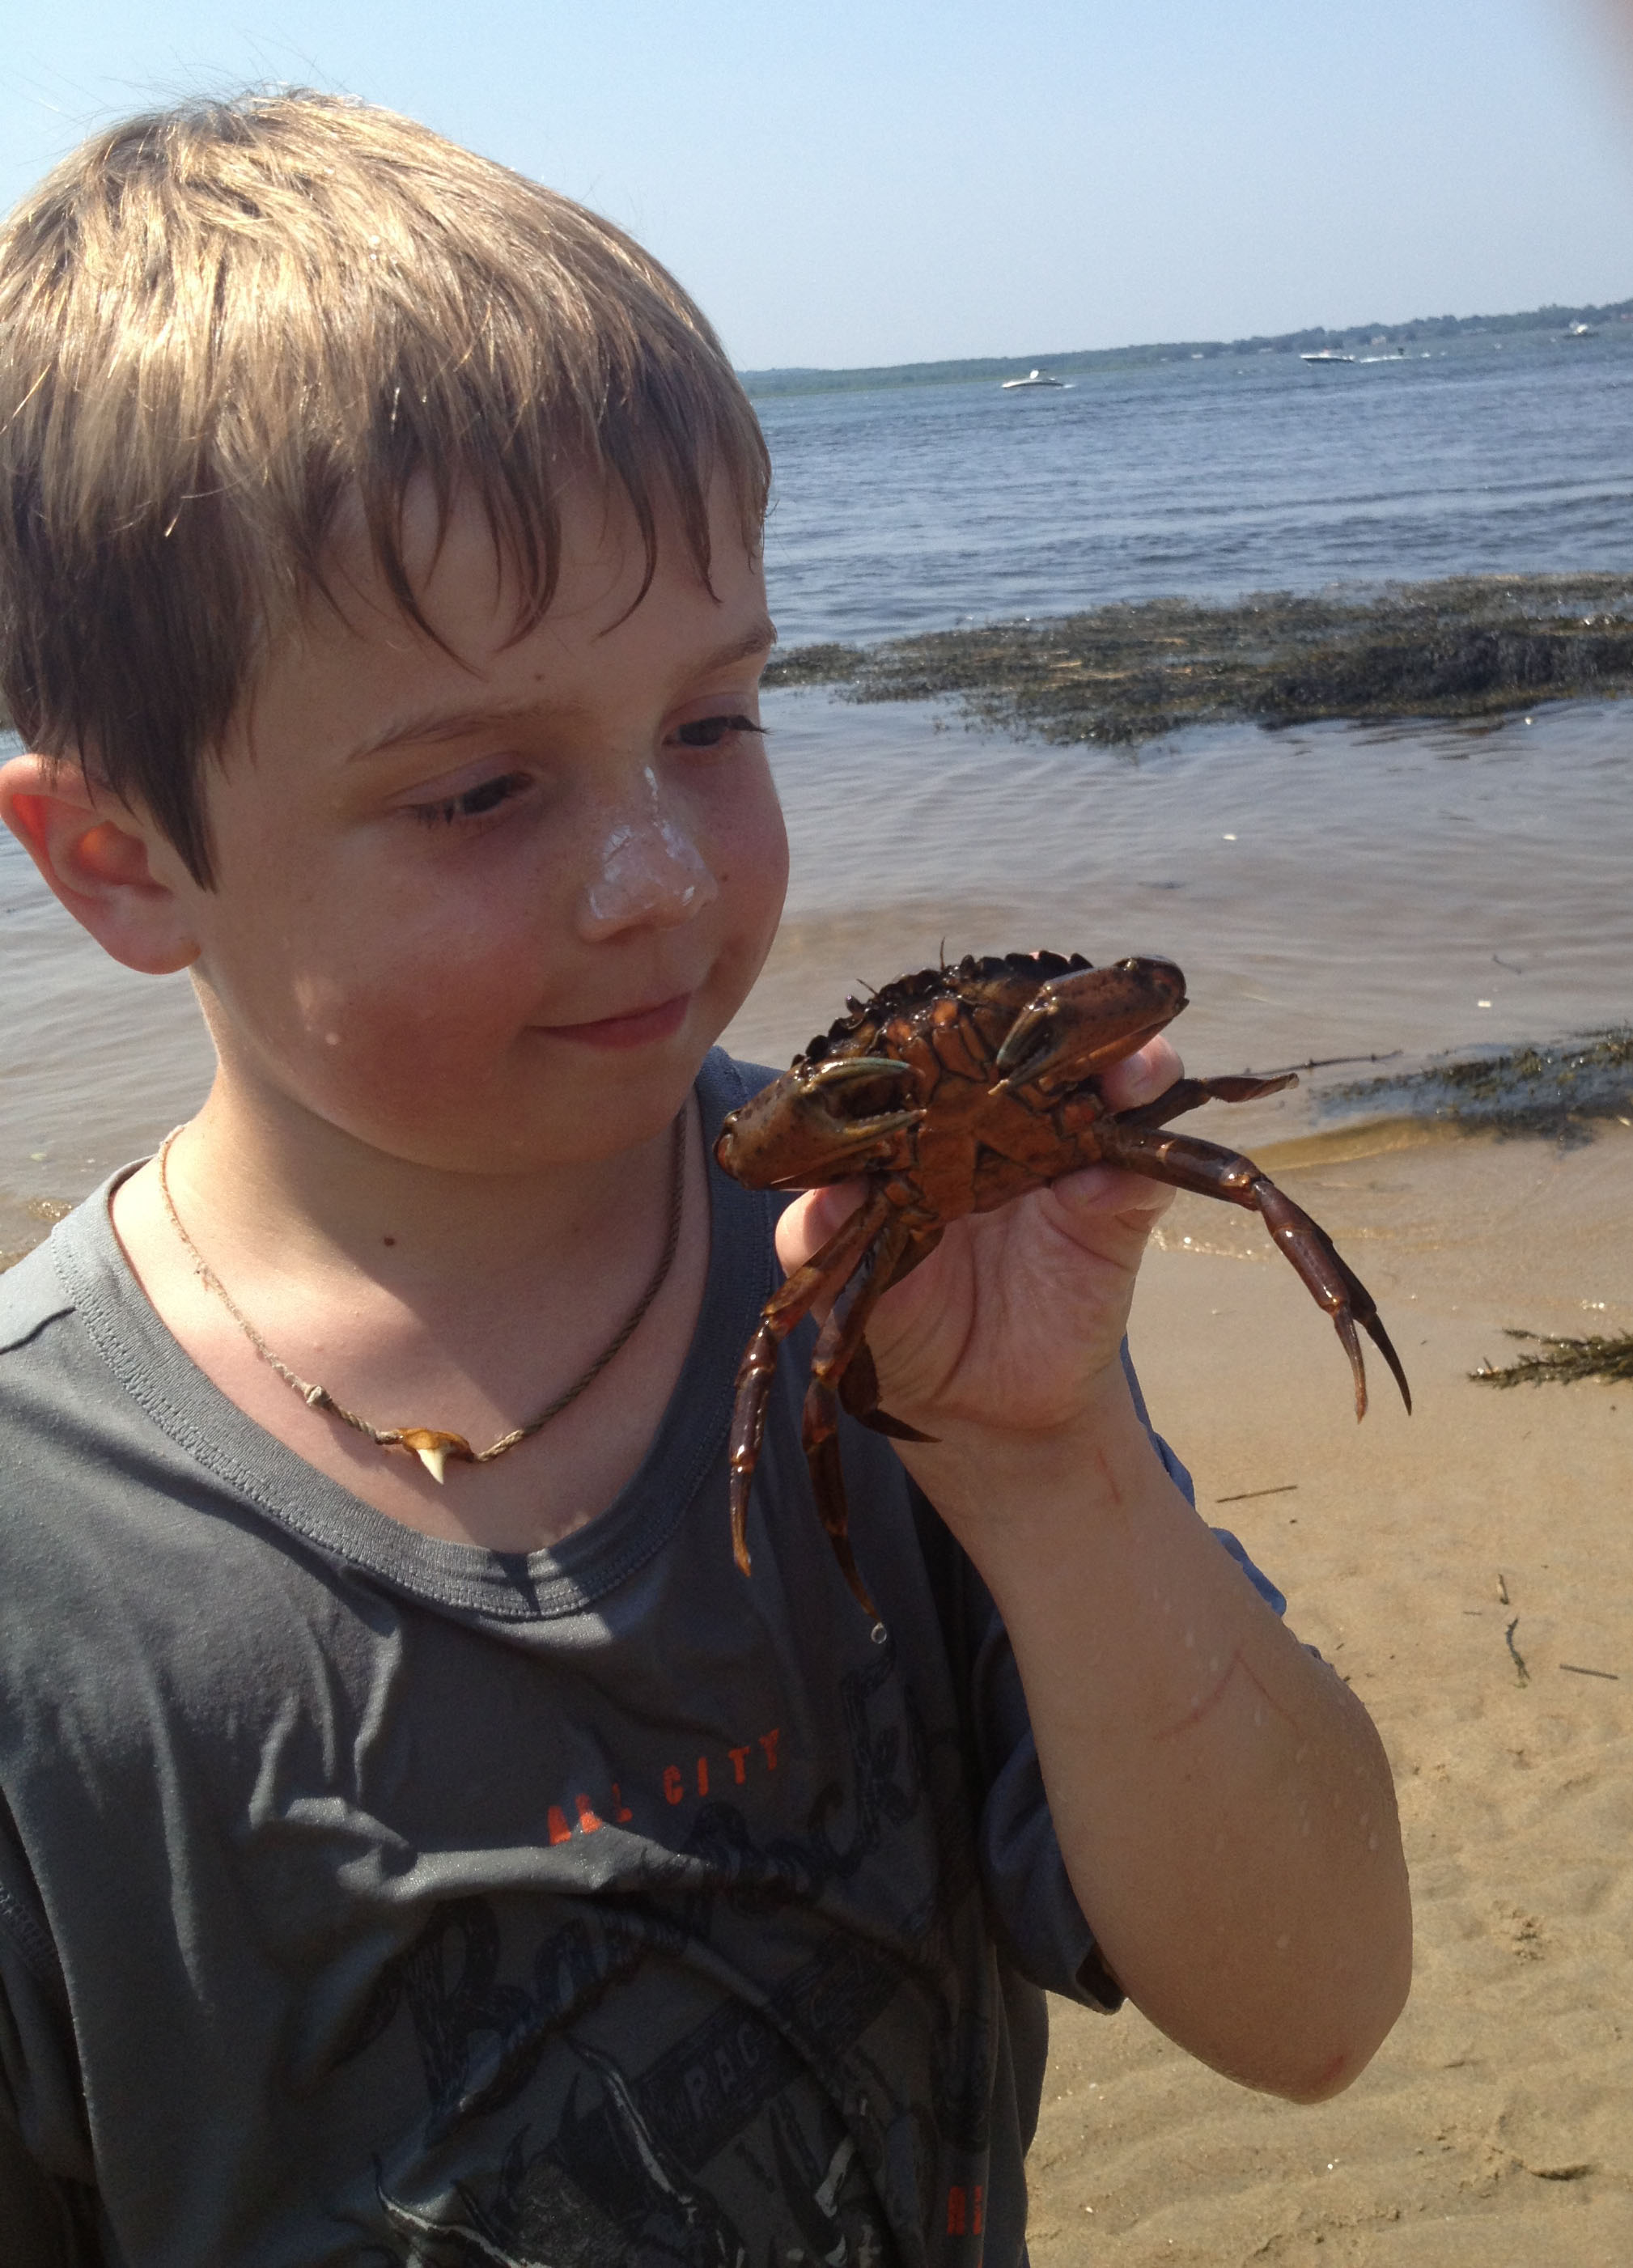 Catching green crabs